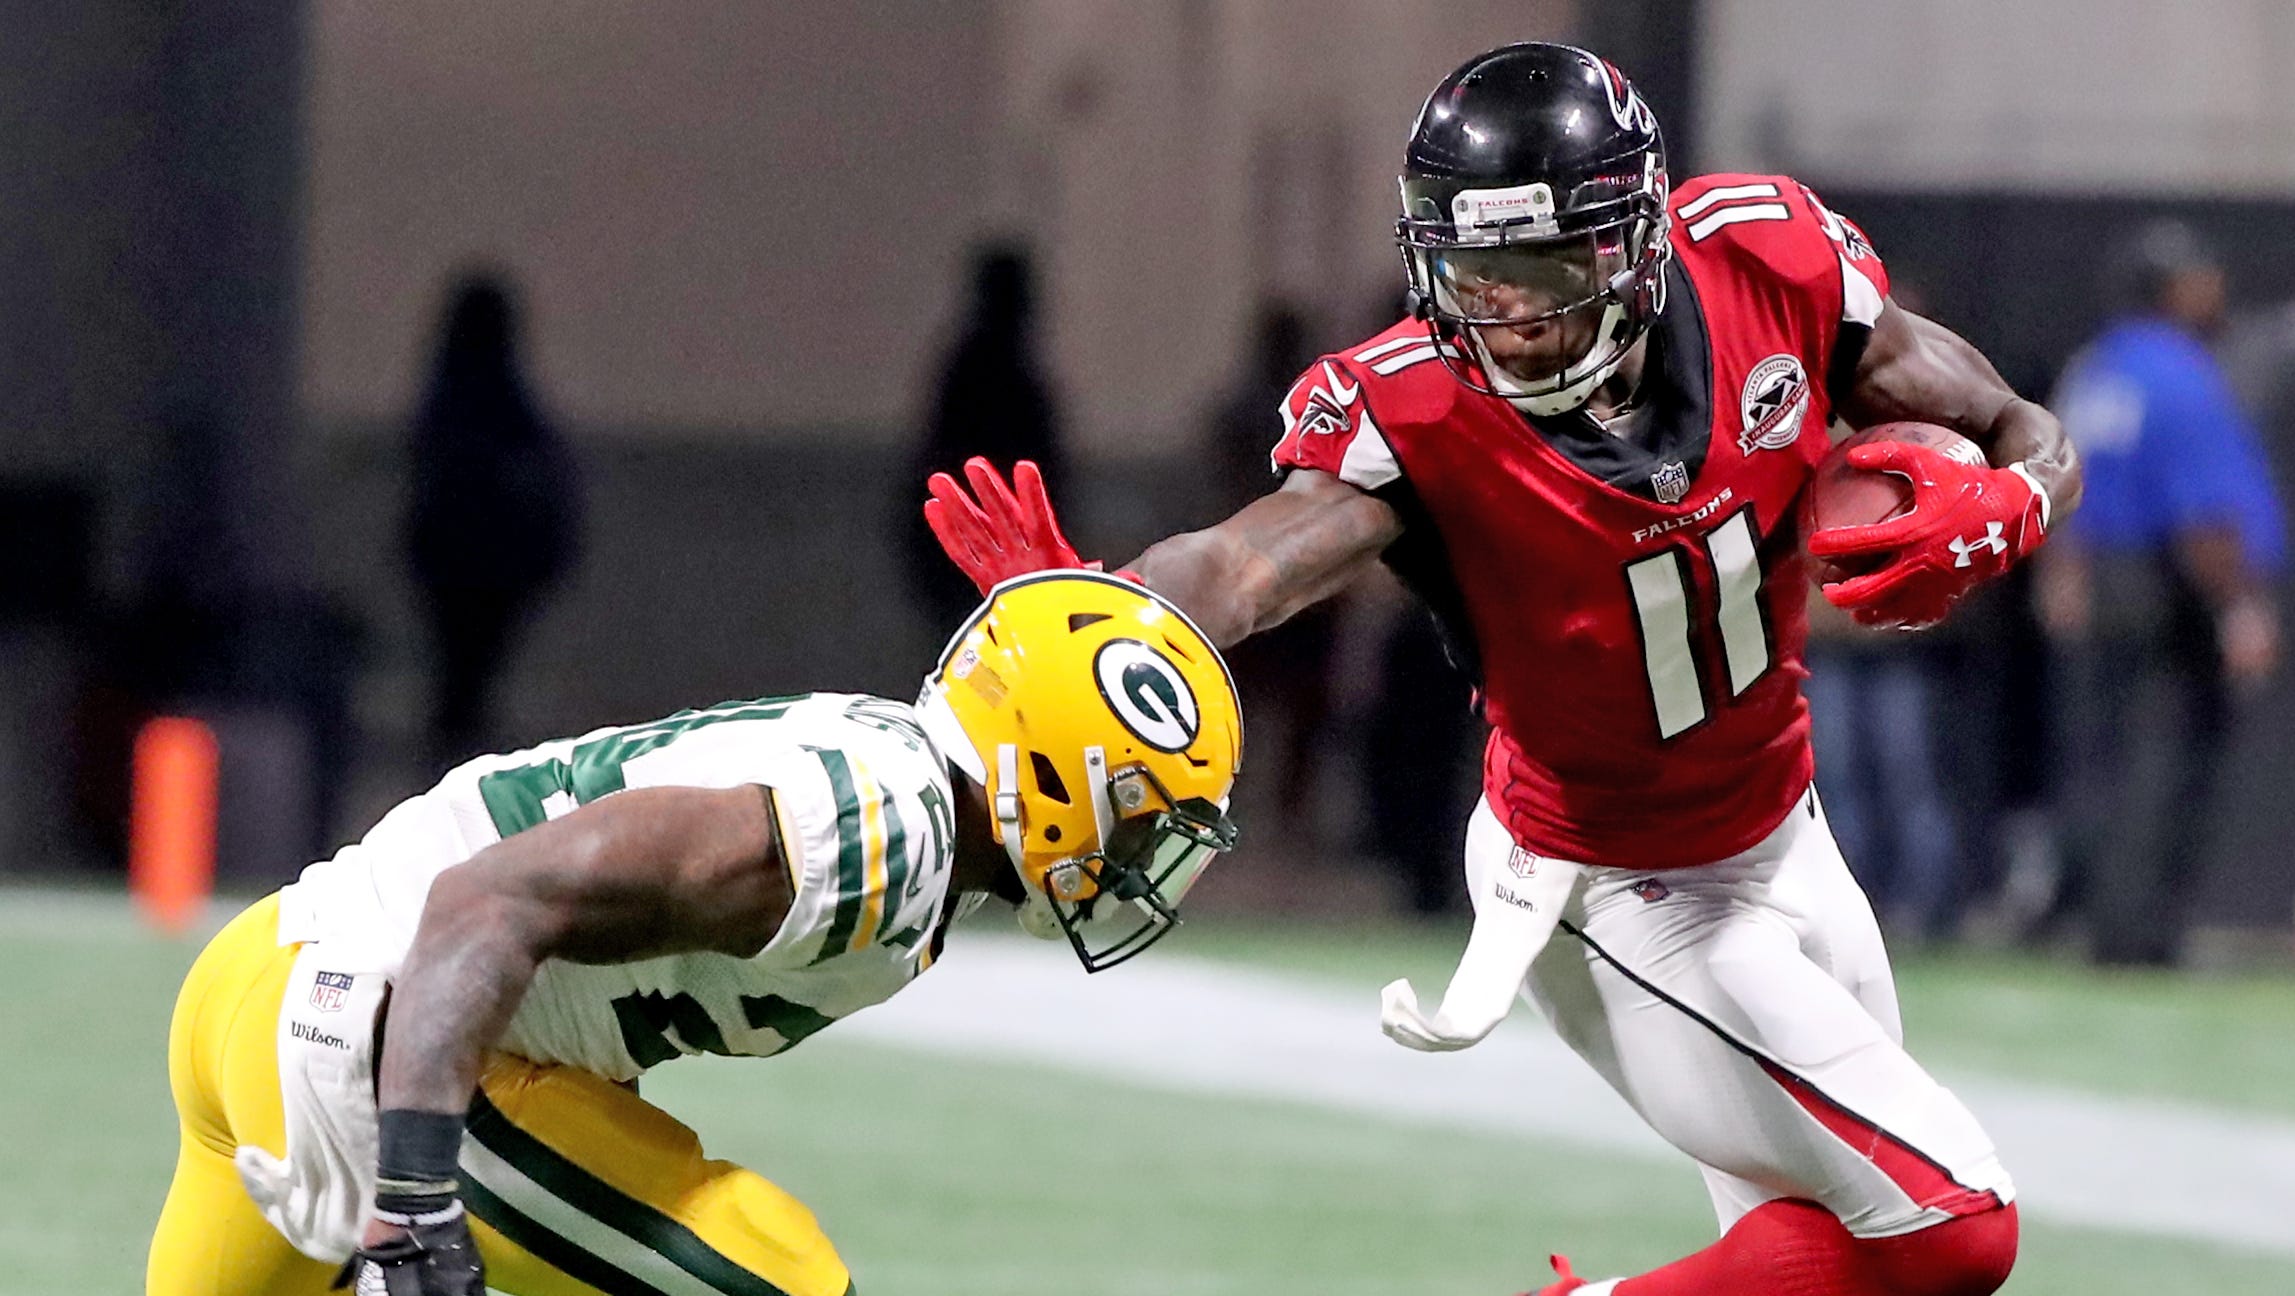 Packers cornerback Quinten Rollins gives up a catch to wide receiver Julio Jones (11) during a September 2017 game against the Falcons at Mercedes-Benz Stadium in Atlanta.